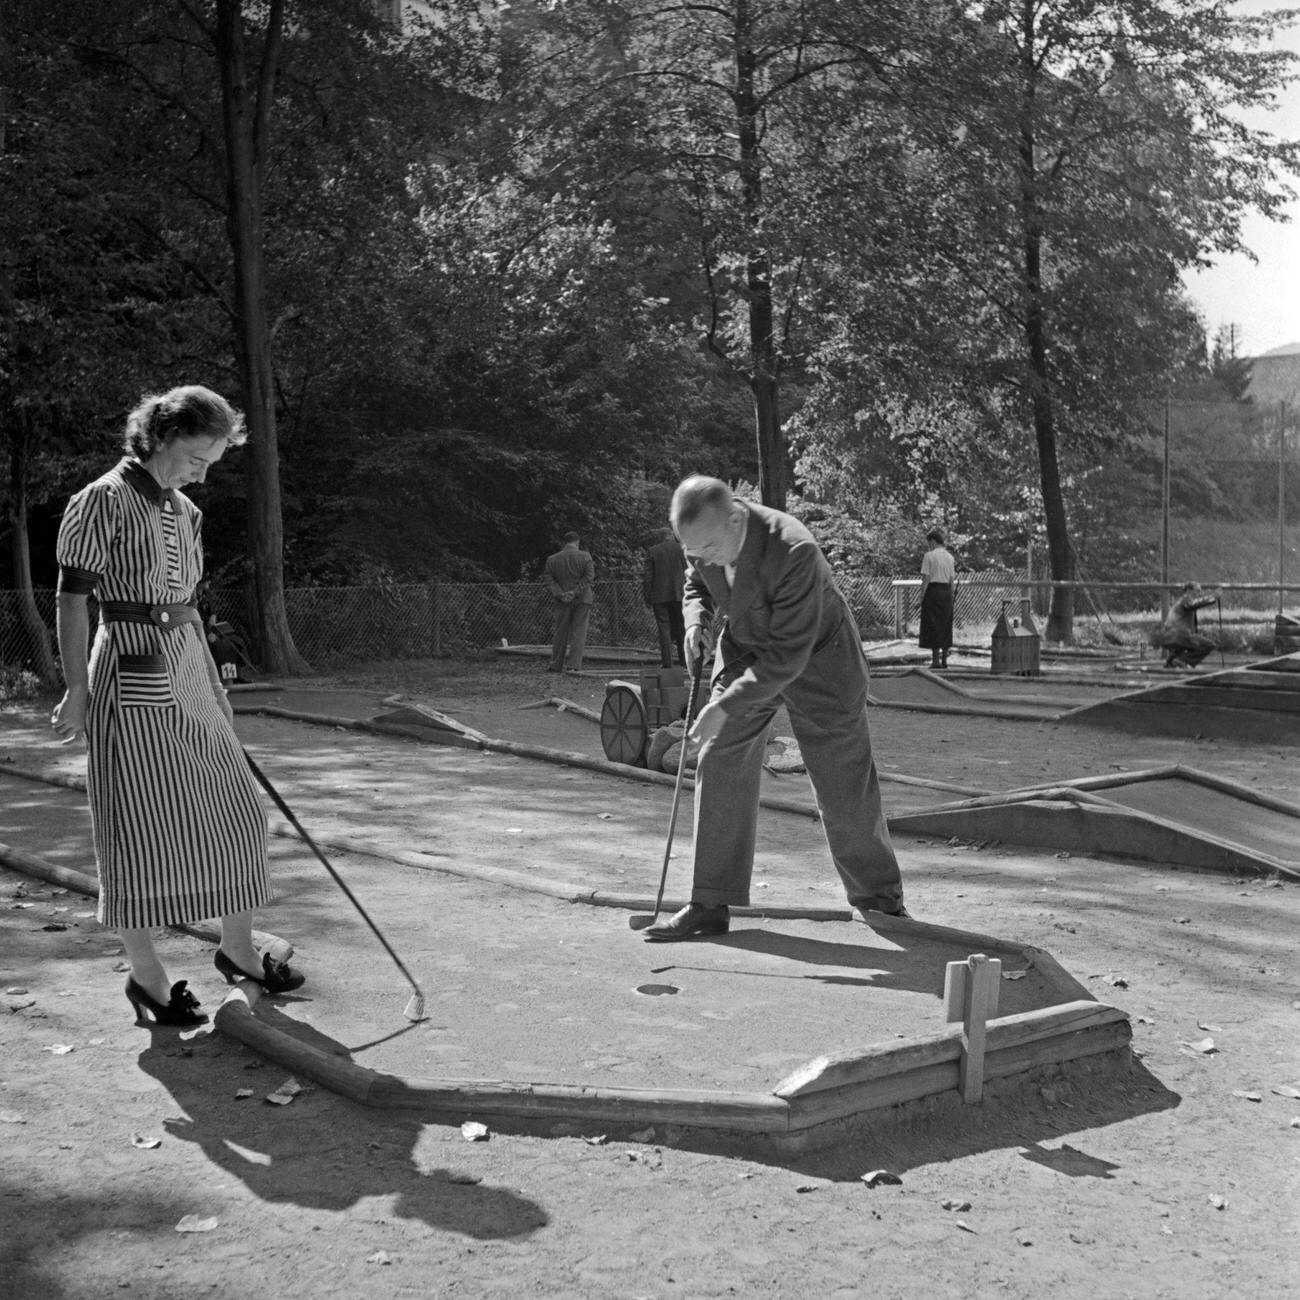 Man and woman playing crazy golf, Herrenalb, Black Forest, Germany, 1930s.